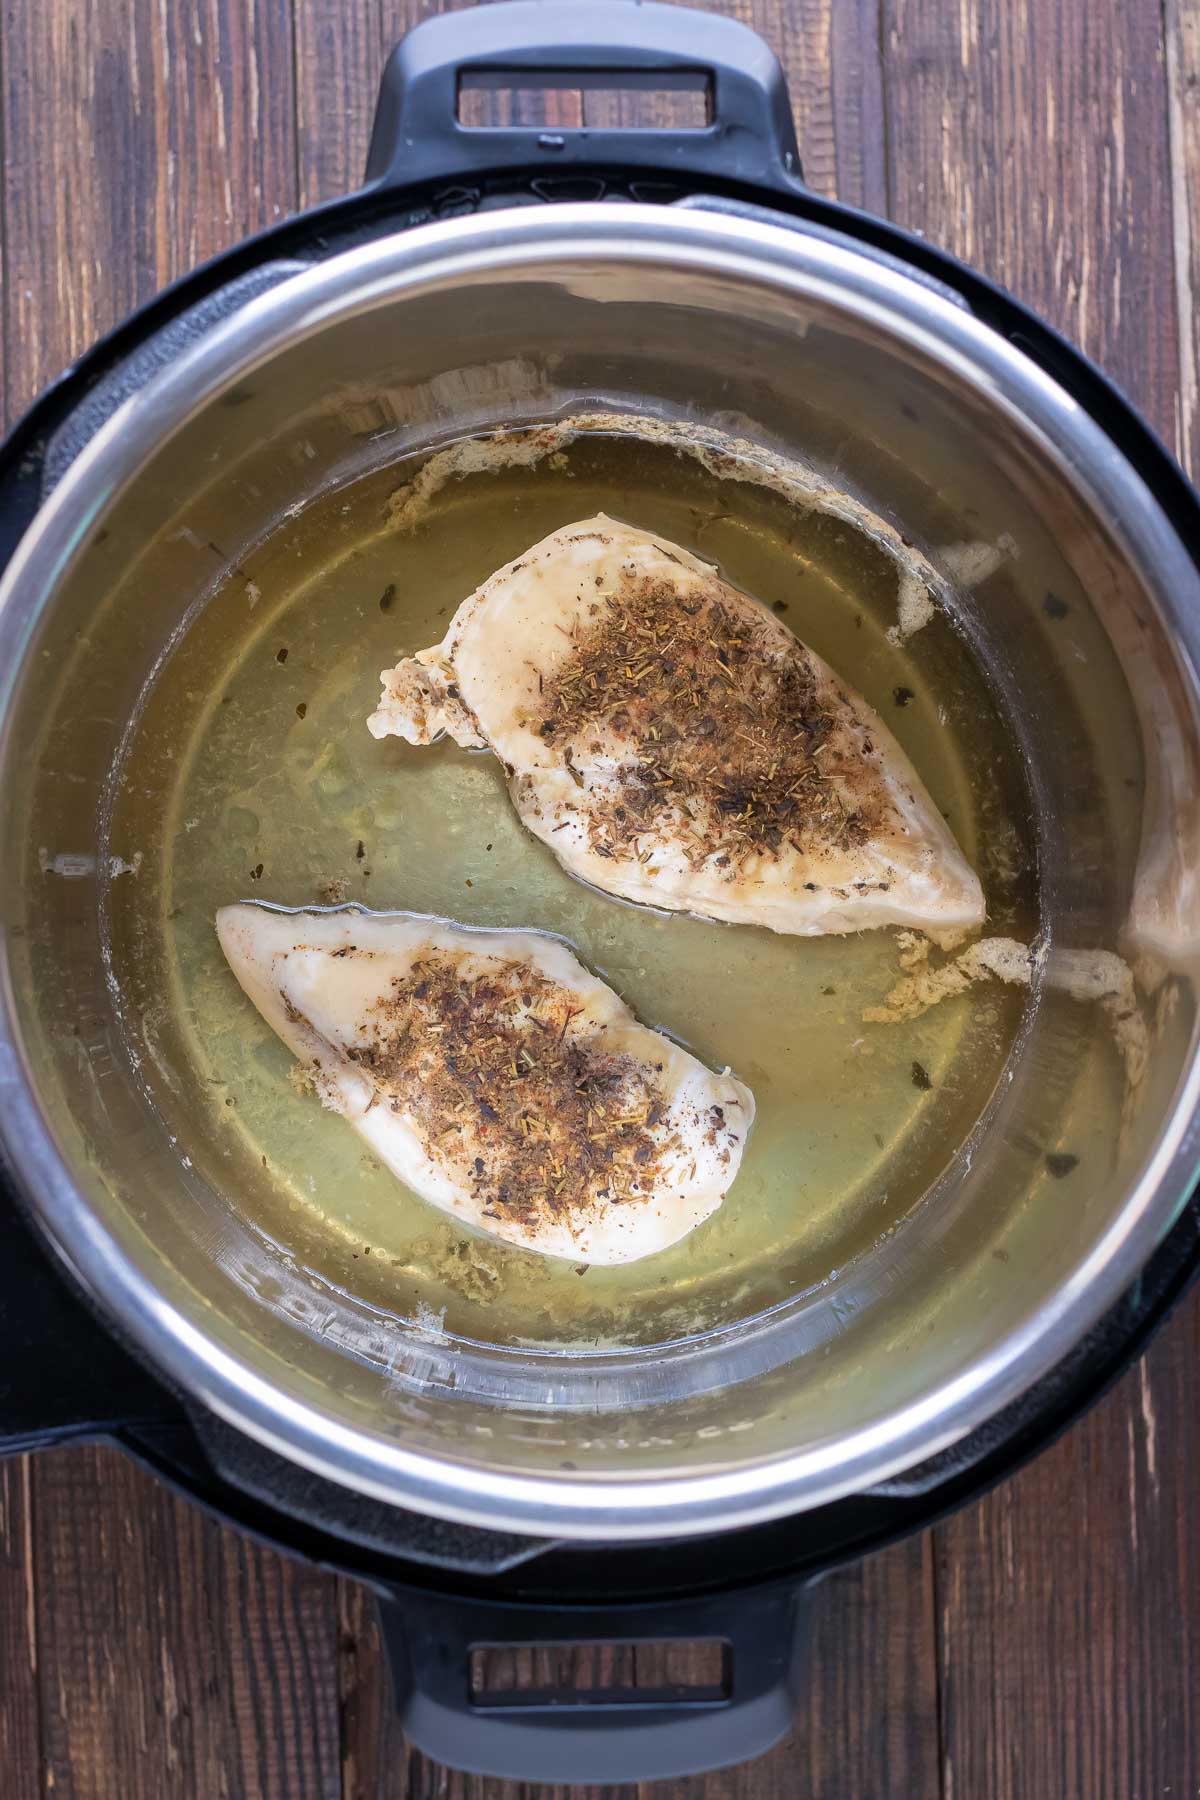 Cooked chicken breasts are ready in the pressure cooker.